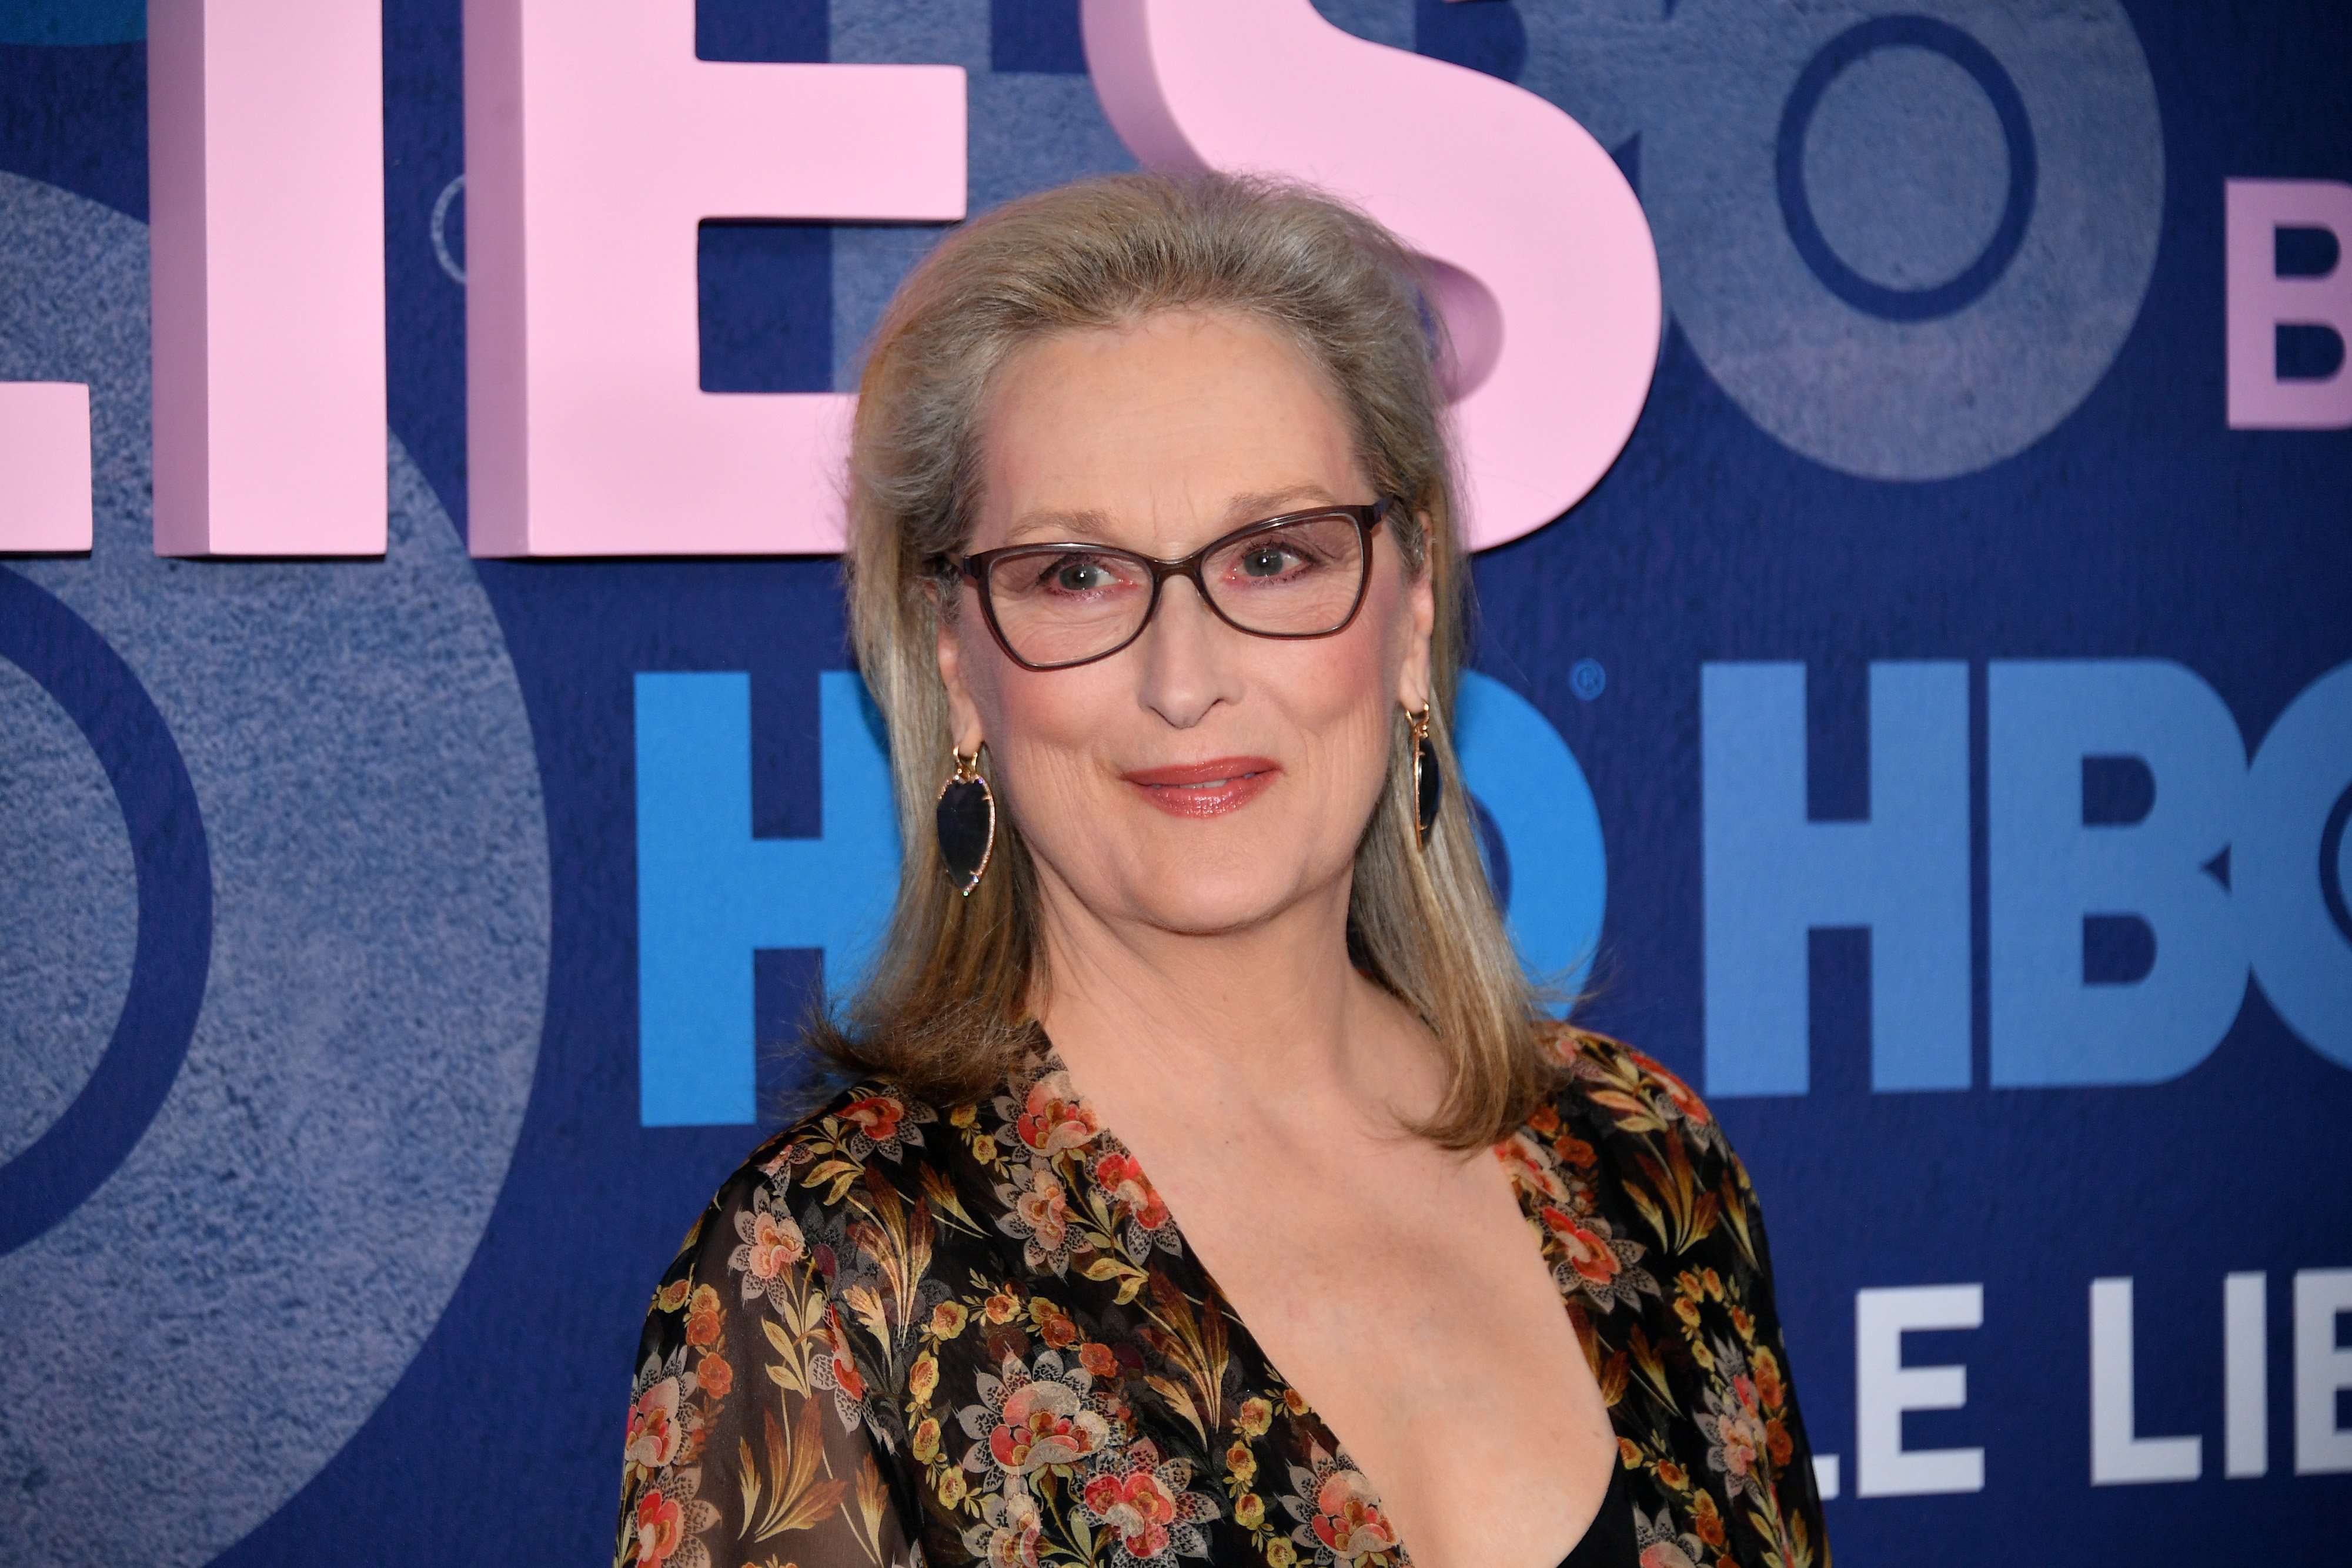 Meryl Streep attends the "Big Little Lies" Season 2 Premiere on May 29, 2019, in New York City. | Source: Getty Images.